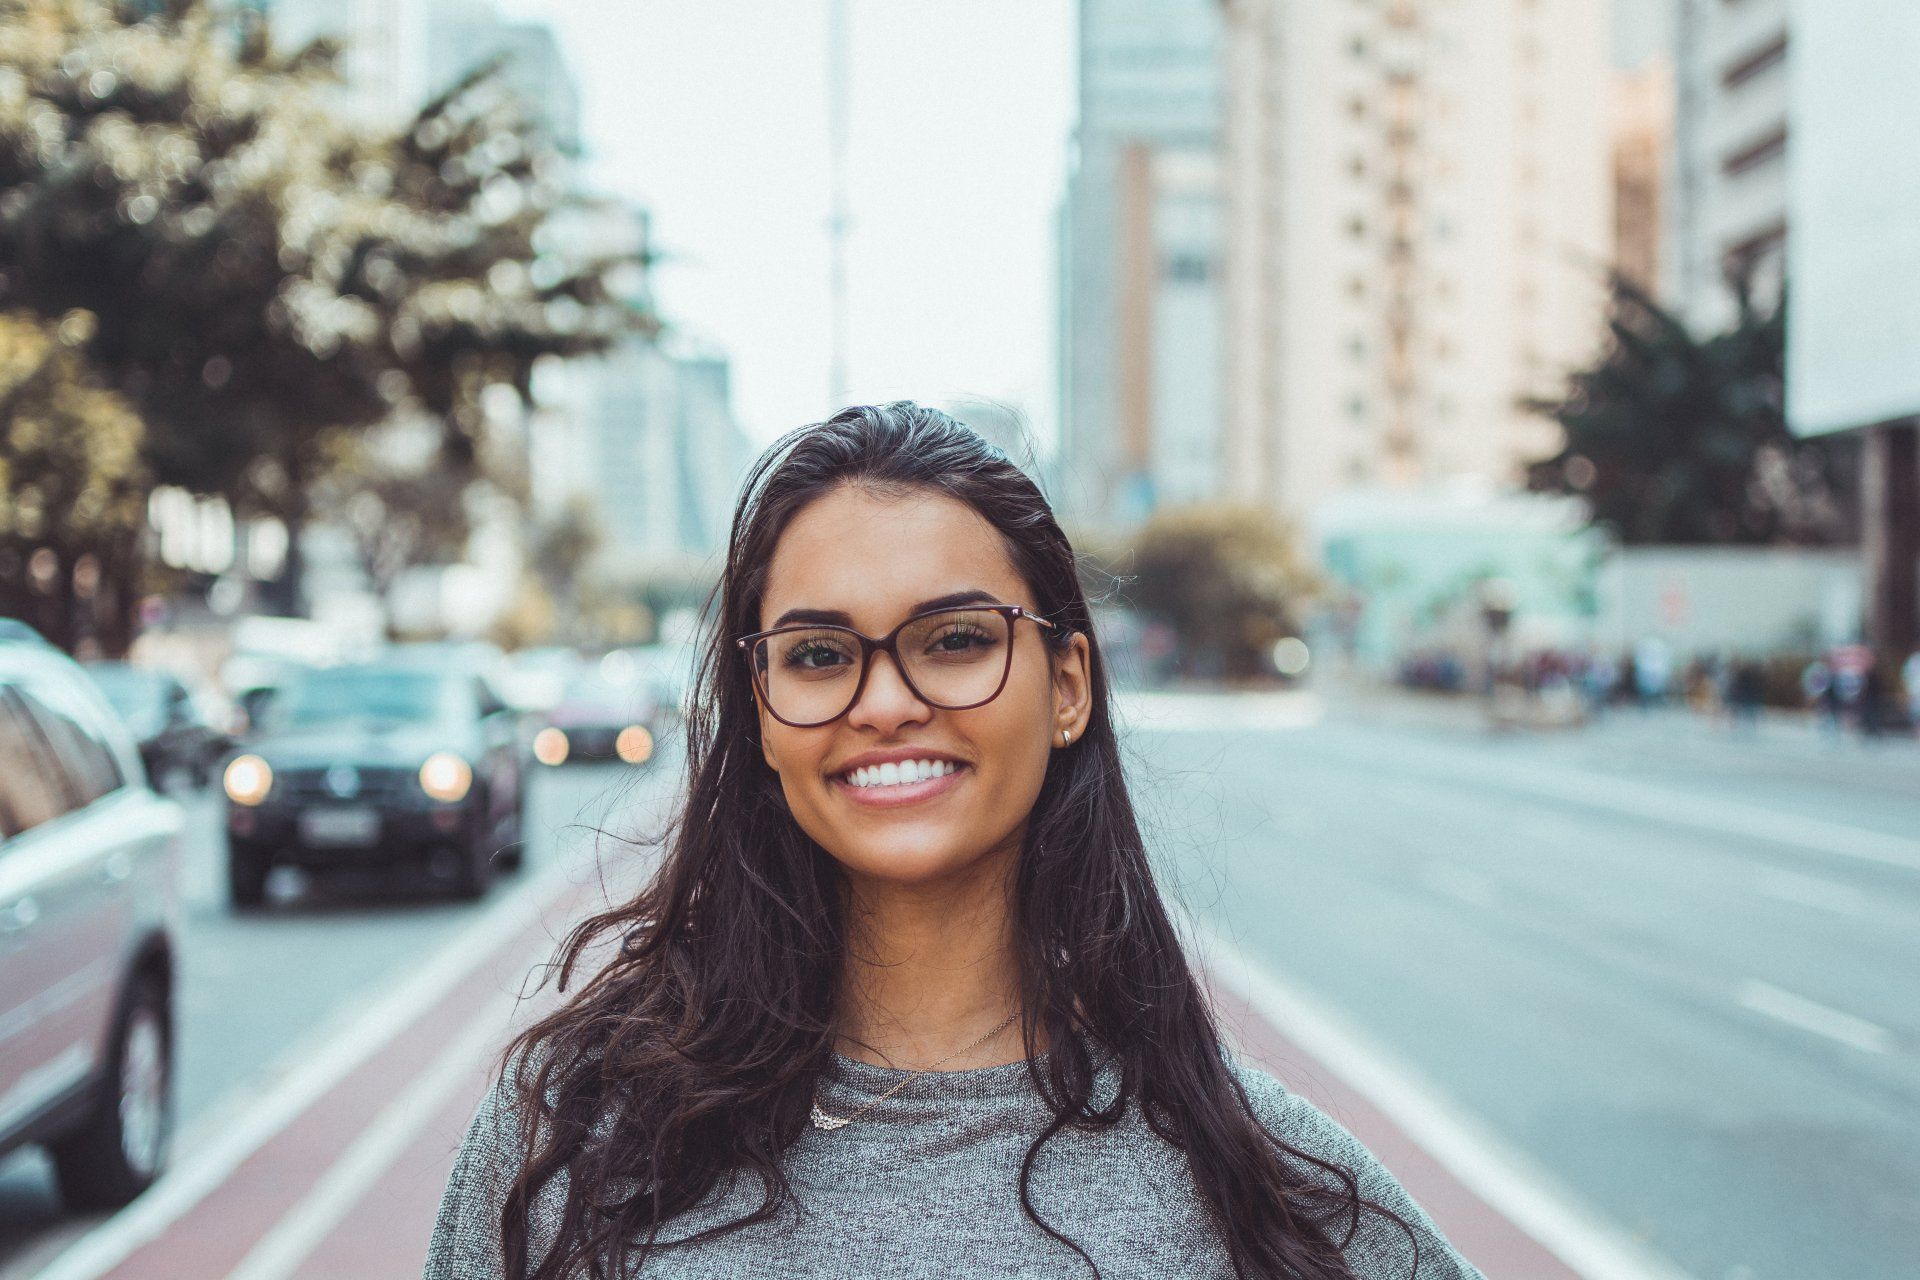 A woman wearing glasses is smiling in front of a city street.